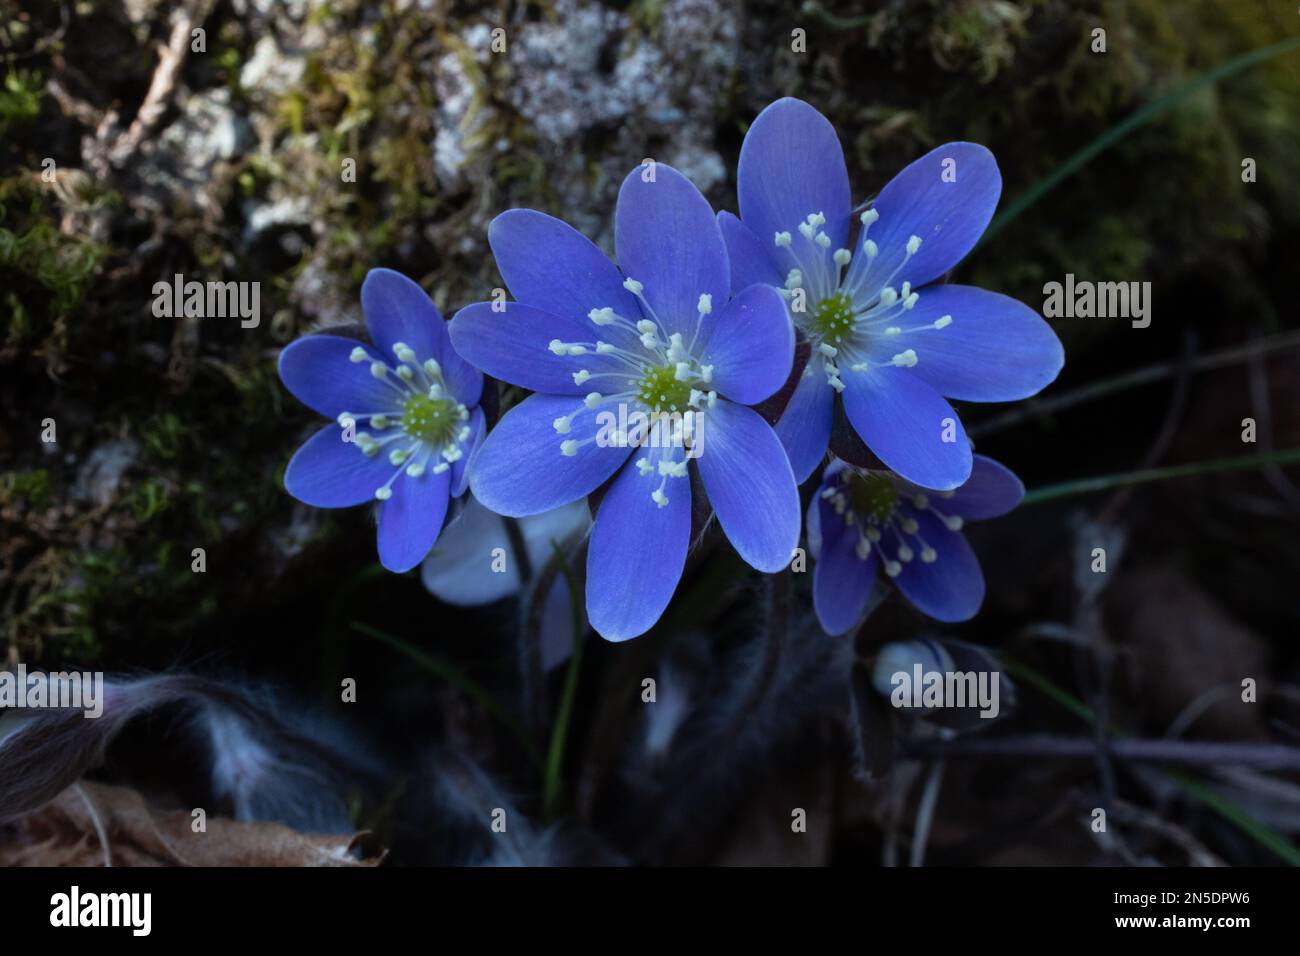 Hepatica found in the woods with moss covered rock behind on a spring day in Taylors Falls, Minnesota USA. Stock Photo